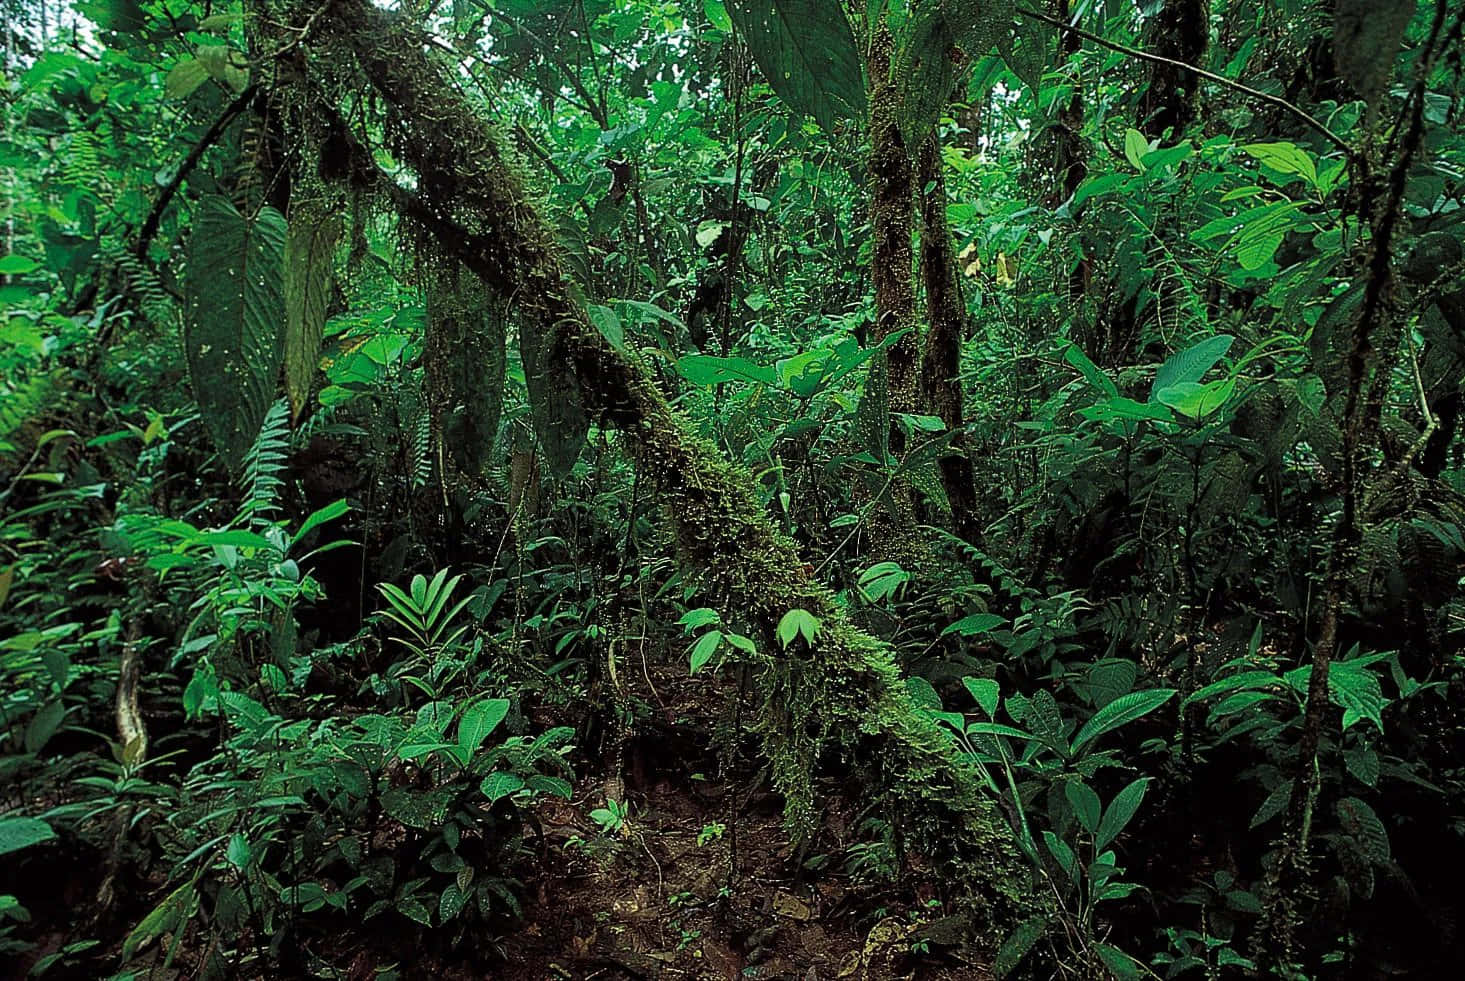 A tropical rainforest abounds with life and lush vegetation